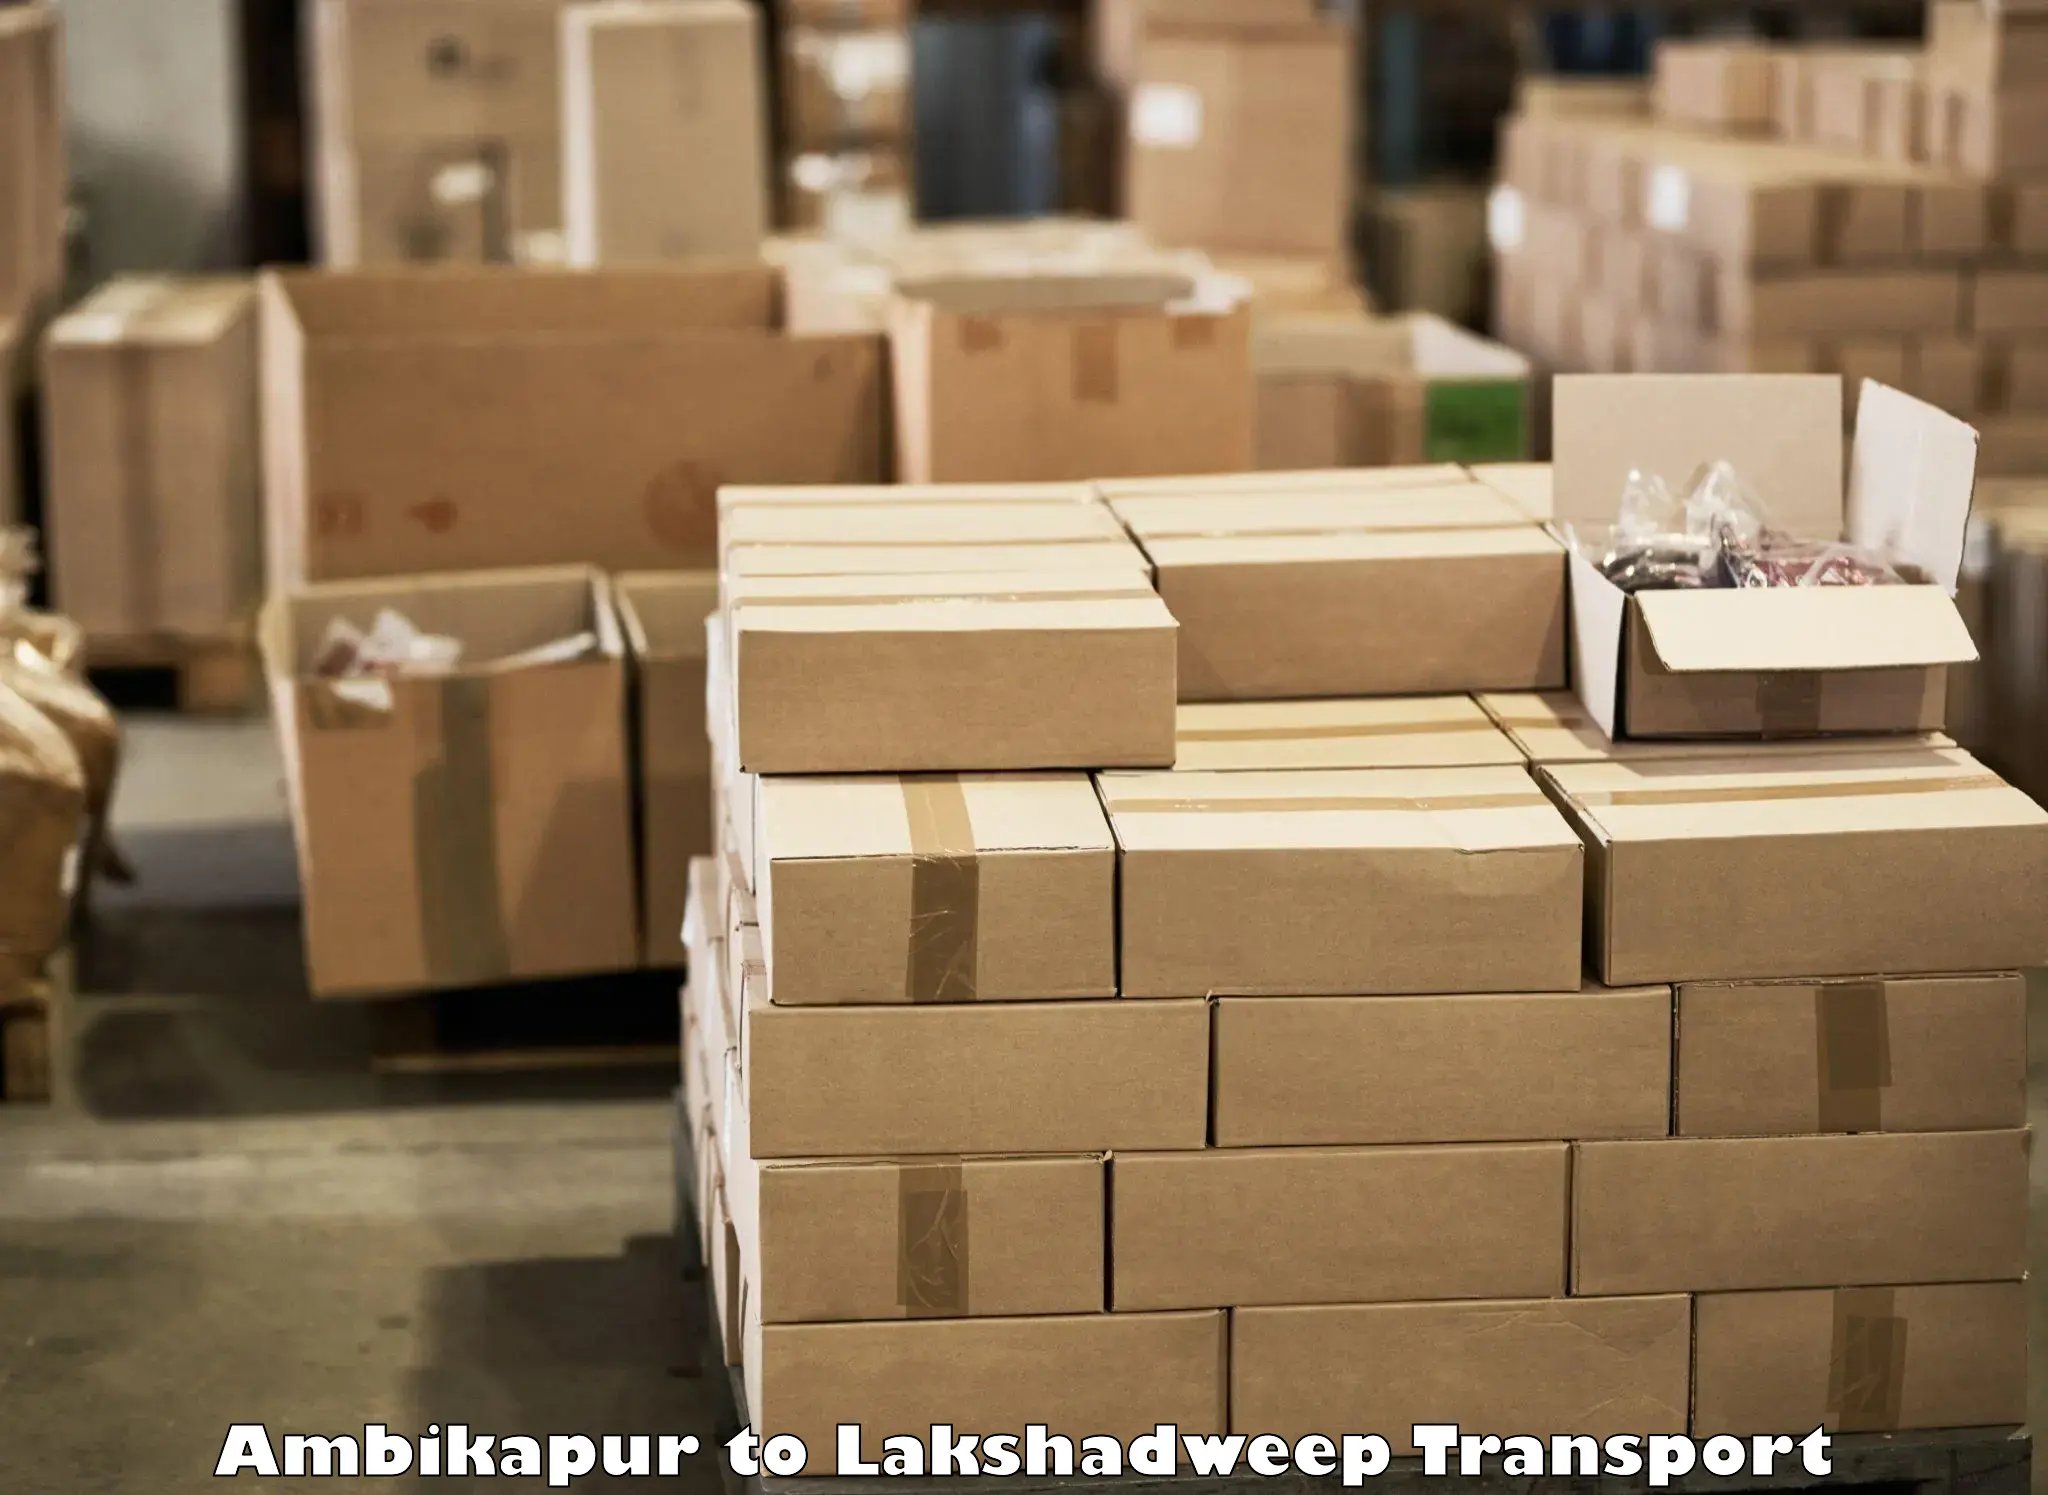 All India transport service Ambikapur to Lakshadweep